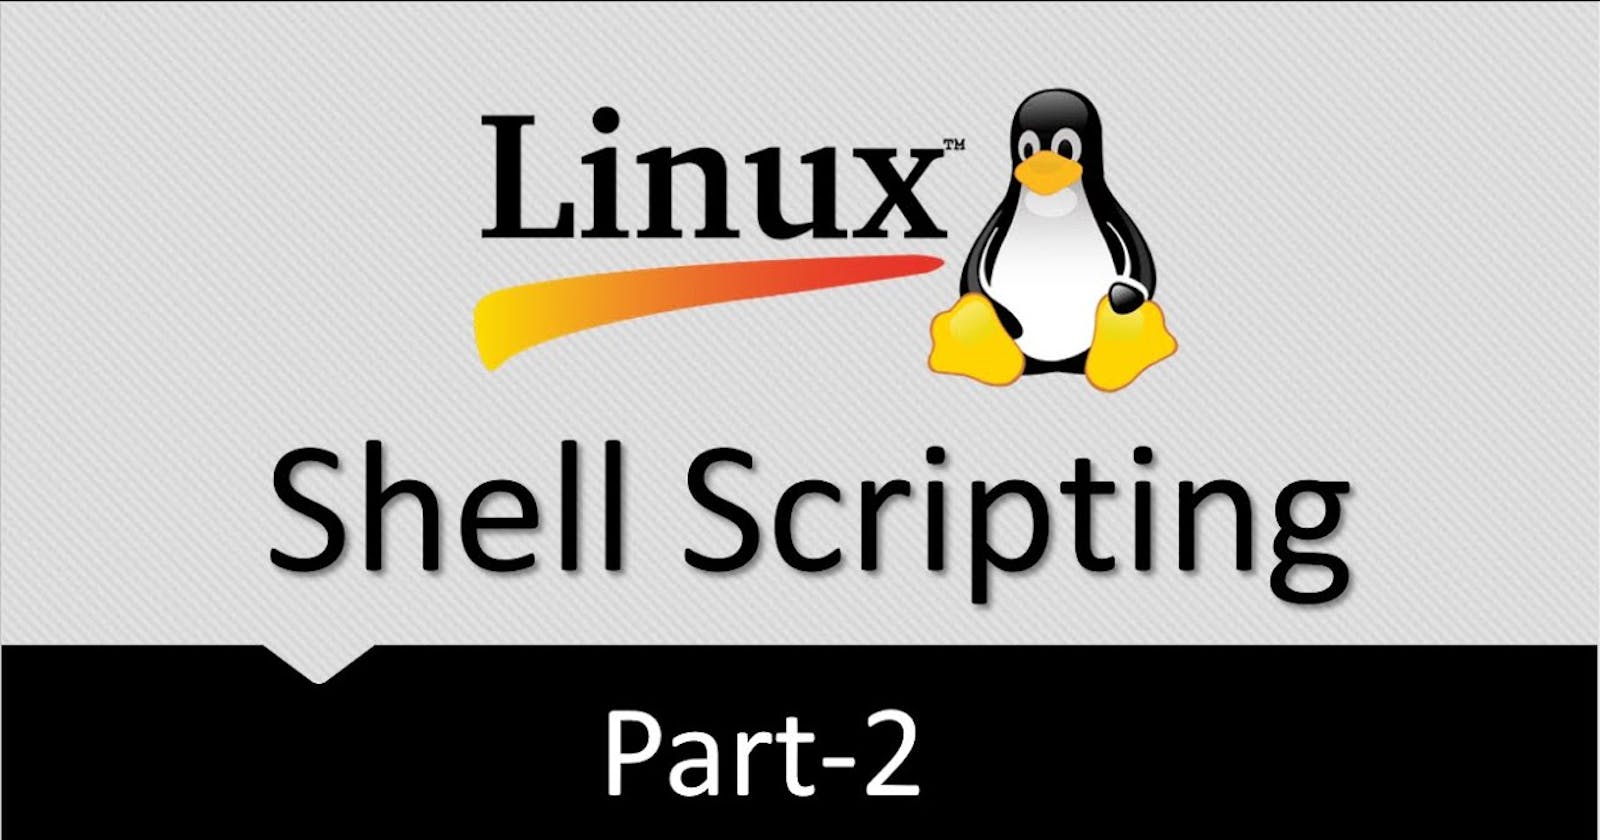 How to Master Advanced Linux Shell Scripting for DevOps: User Management and Automation | Day 5 of  90 Days of DevOps Journey